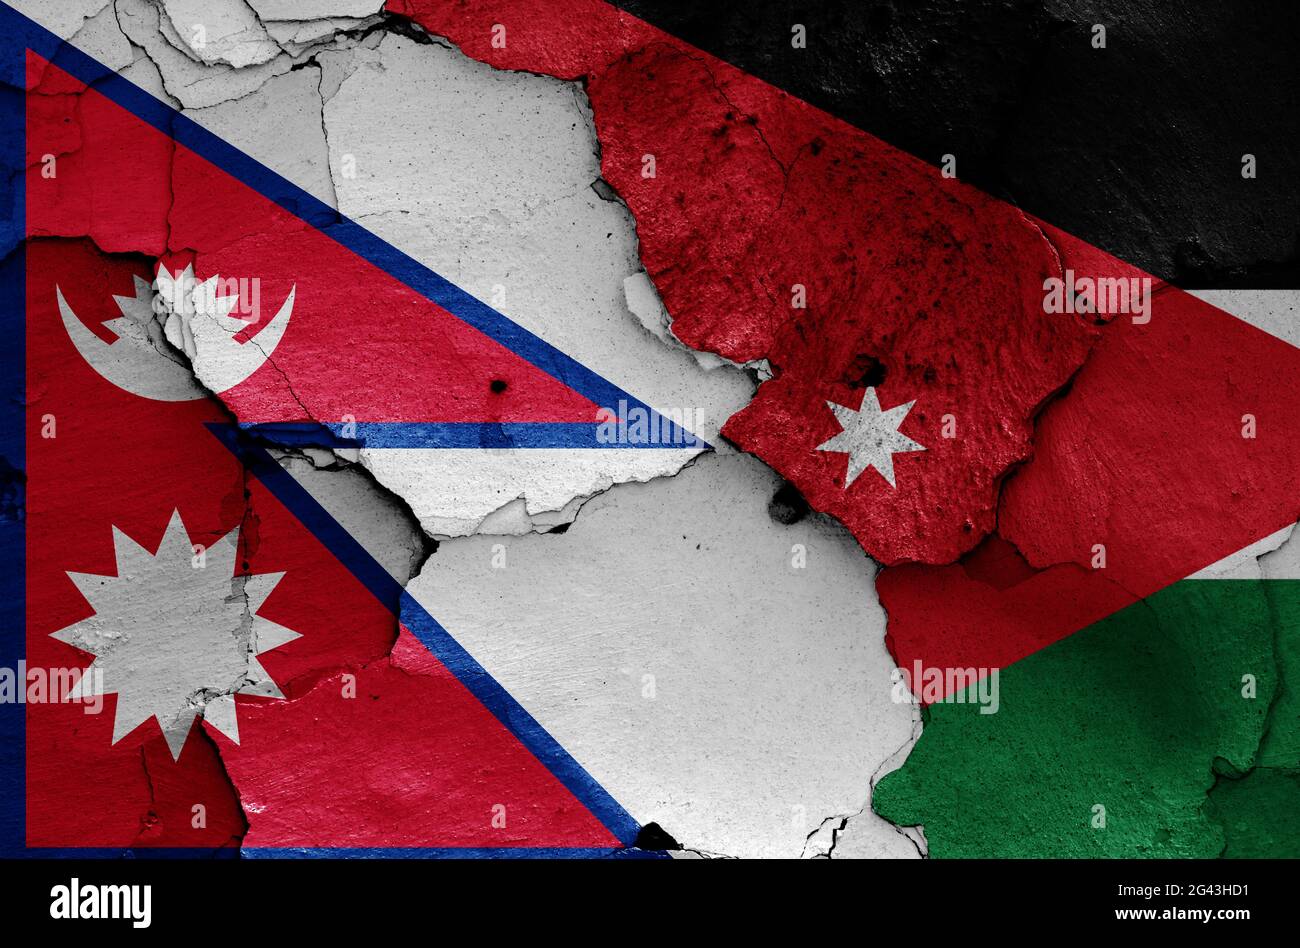 Flags of Nepal and Jordan painted on cracked wall Stock Photo